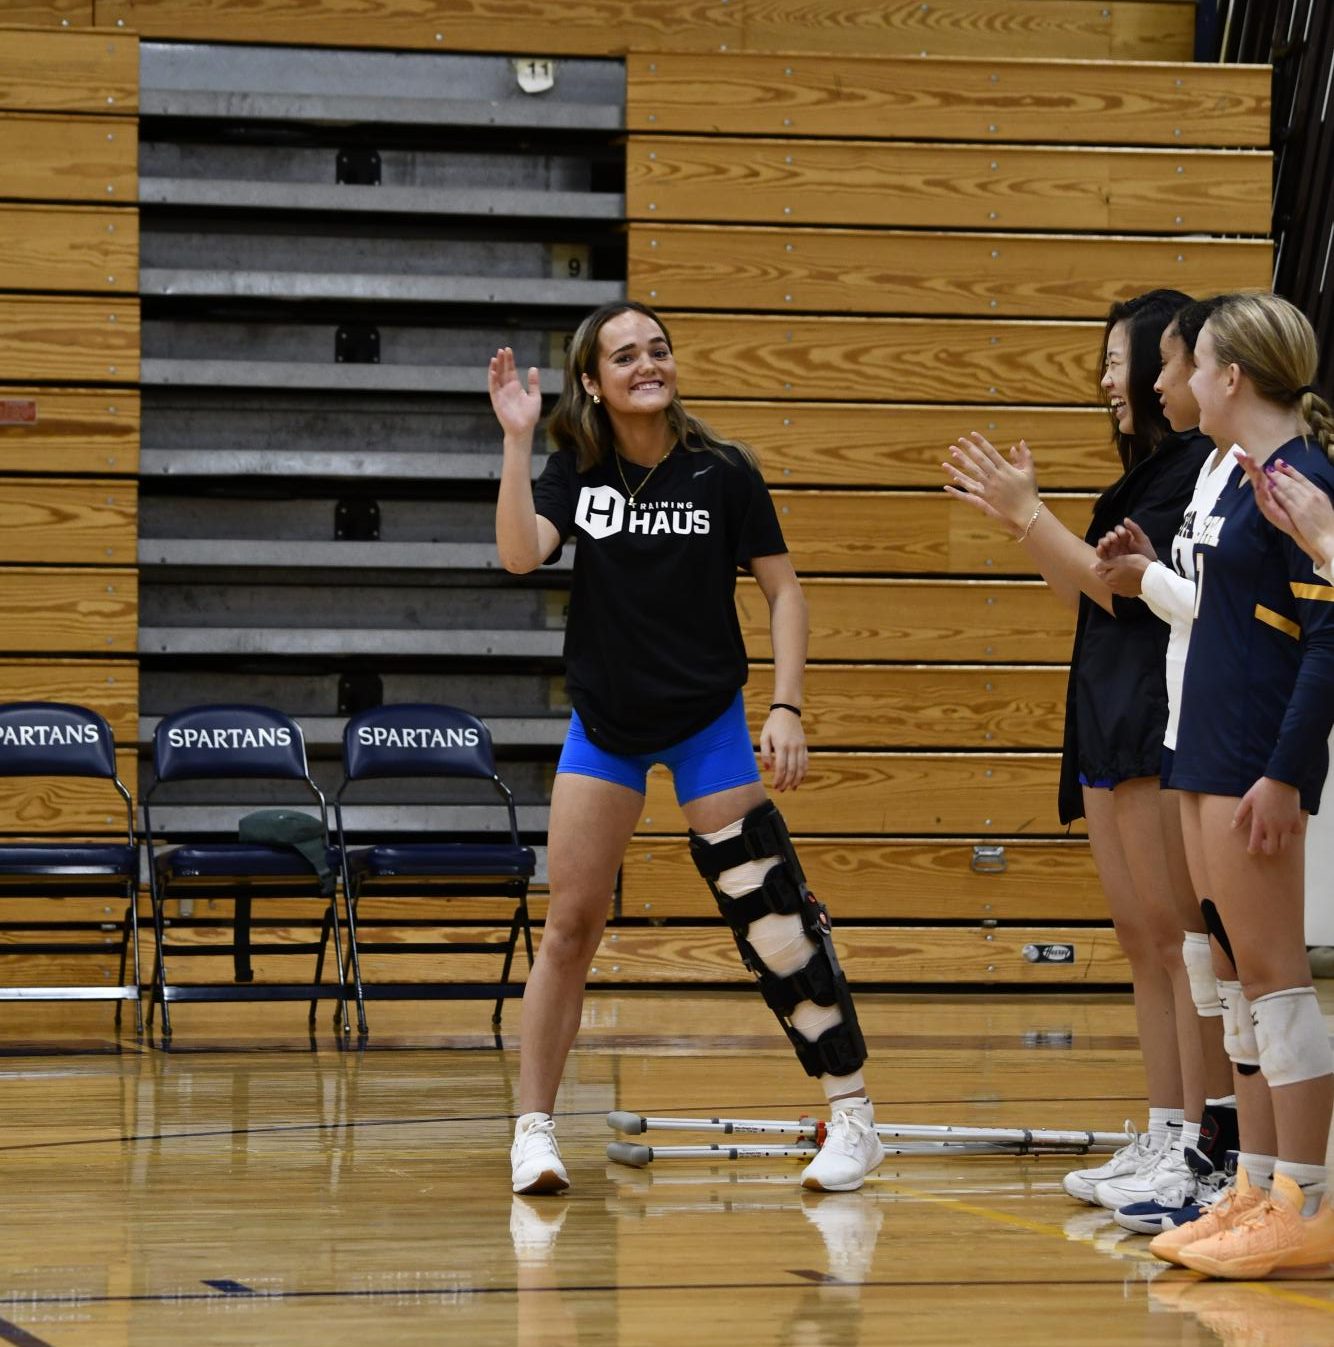 STAND AND SUPPORT. Although she is injured, Vogenthaler continues to show up at games and support her teammates.